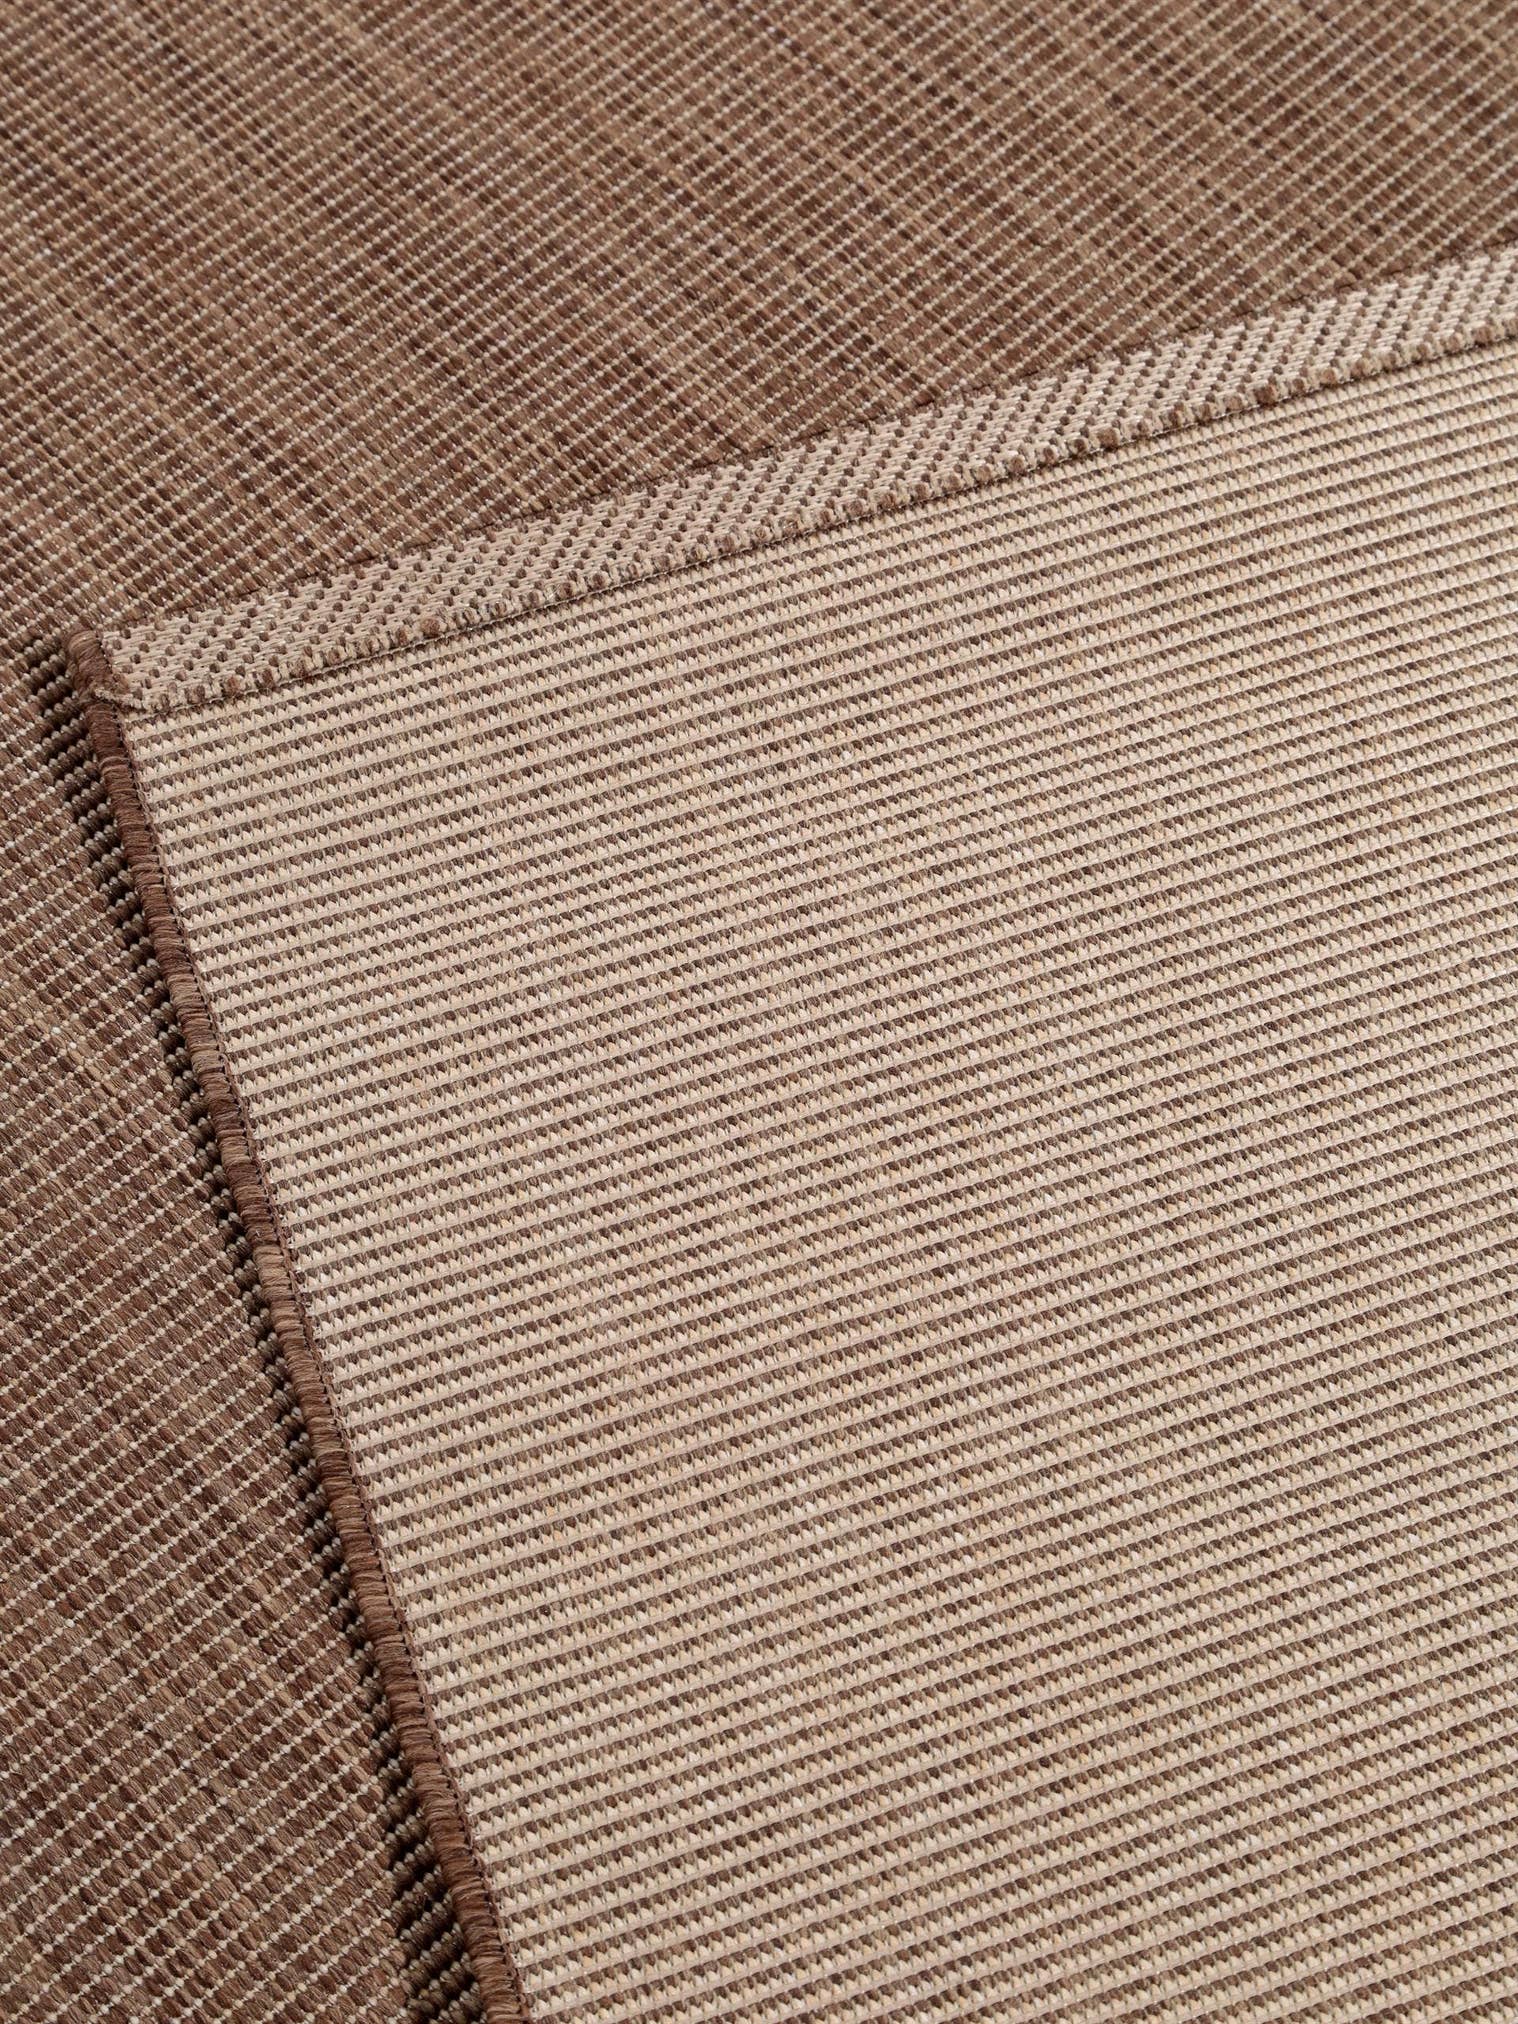 Rug made of 100% Polypropylene in Brown with a 6 - 10 mm high pile by benuta Nest